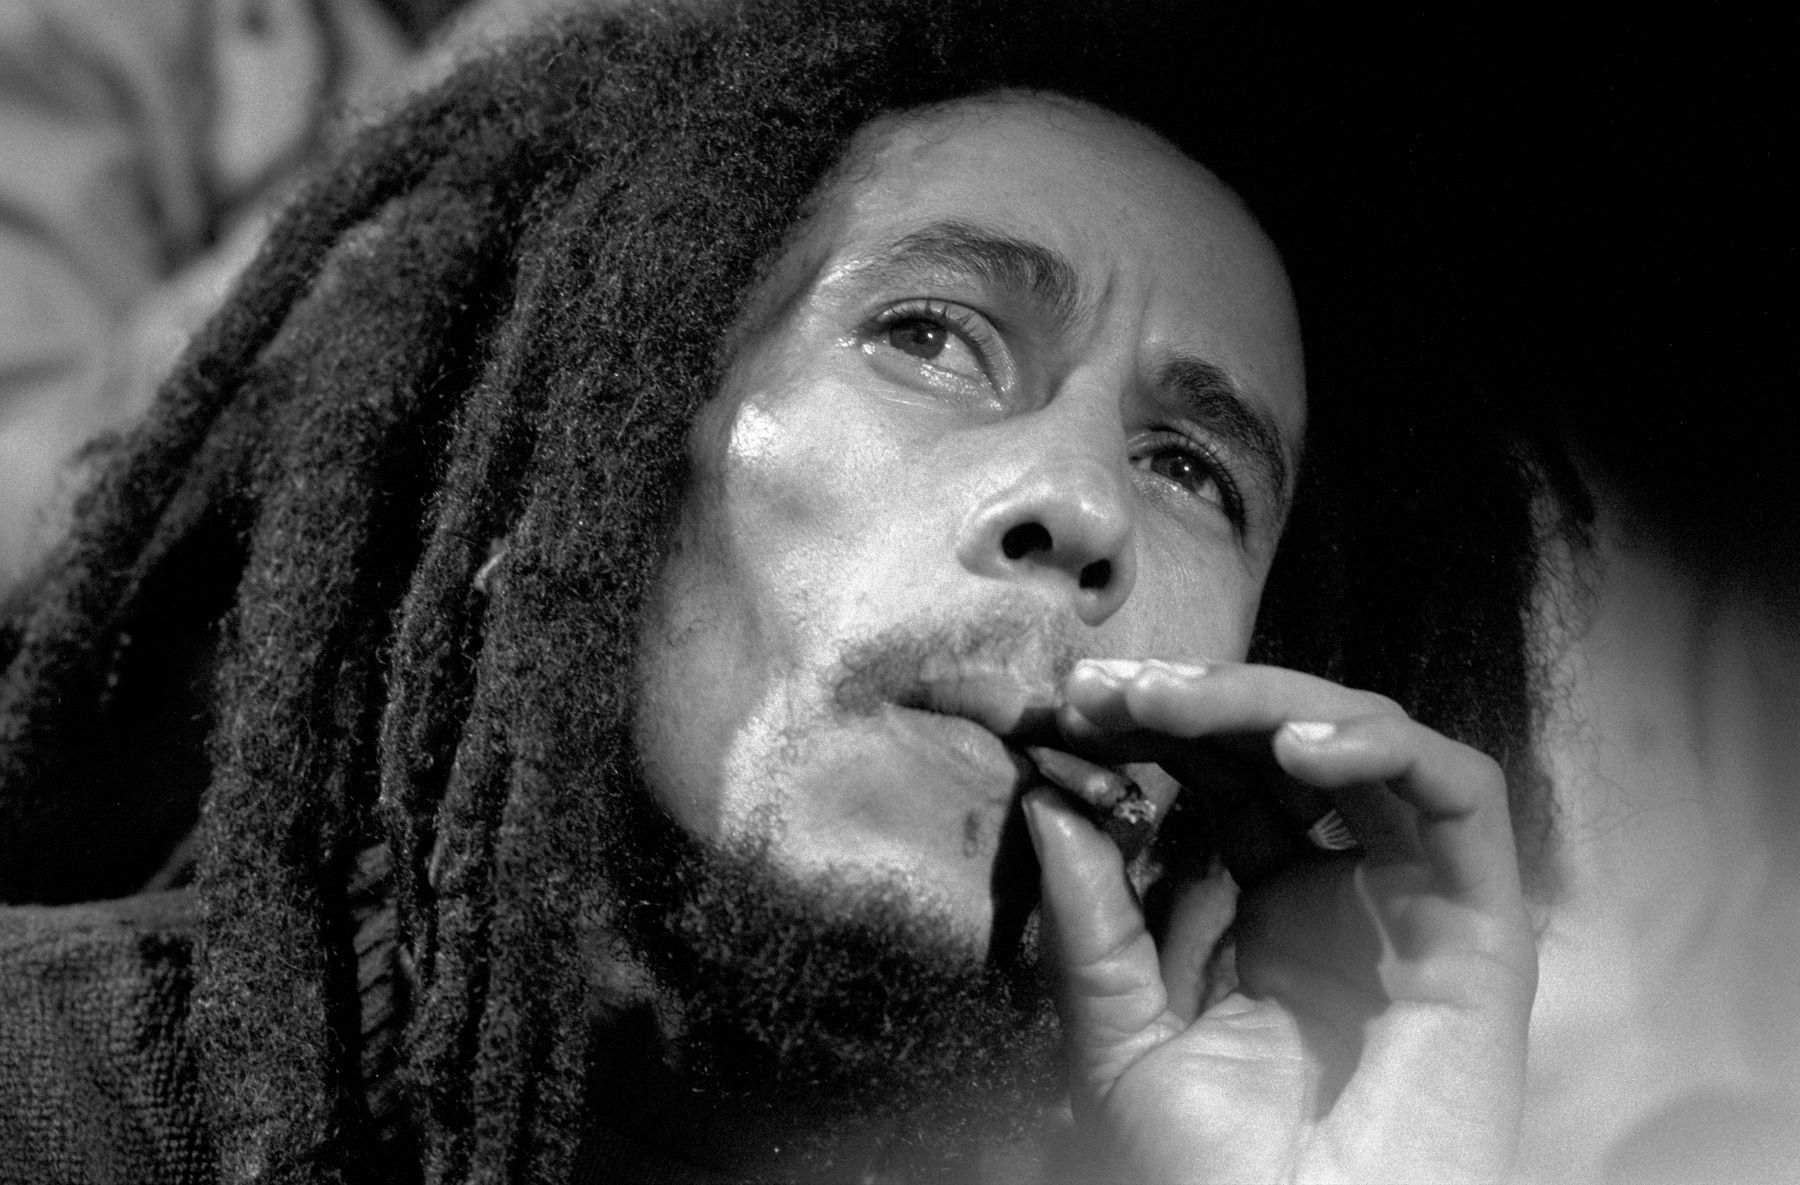 Bob Marley Refused to Get Treatment for the Rare Cancer That Metastasized on His Toe, Ultimately Causing His Untimely Death